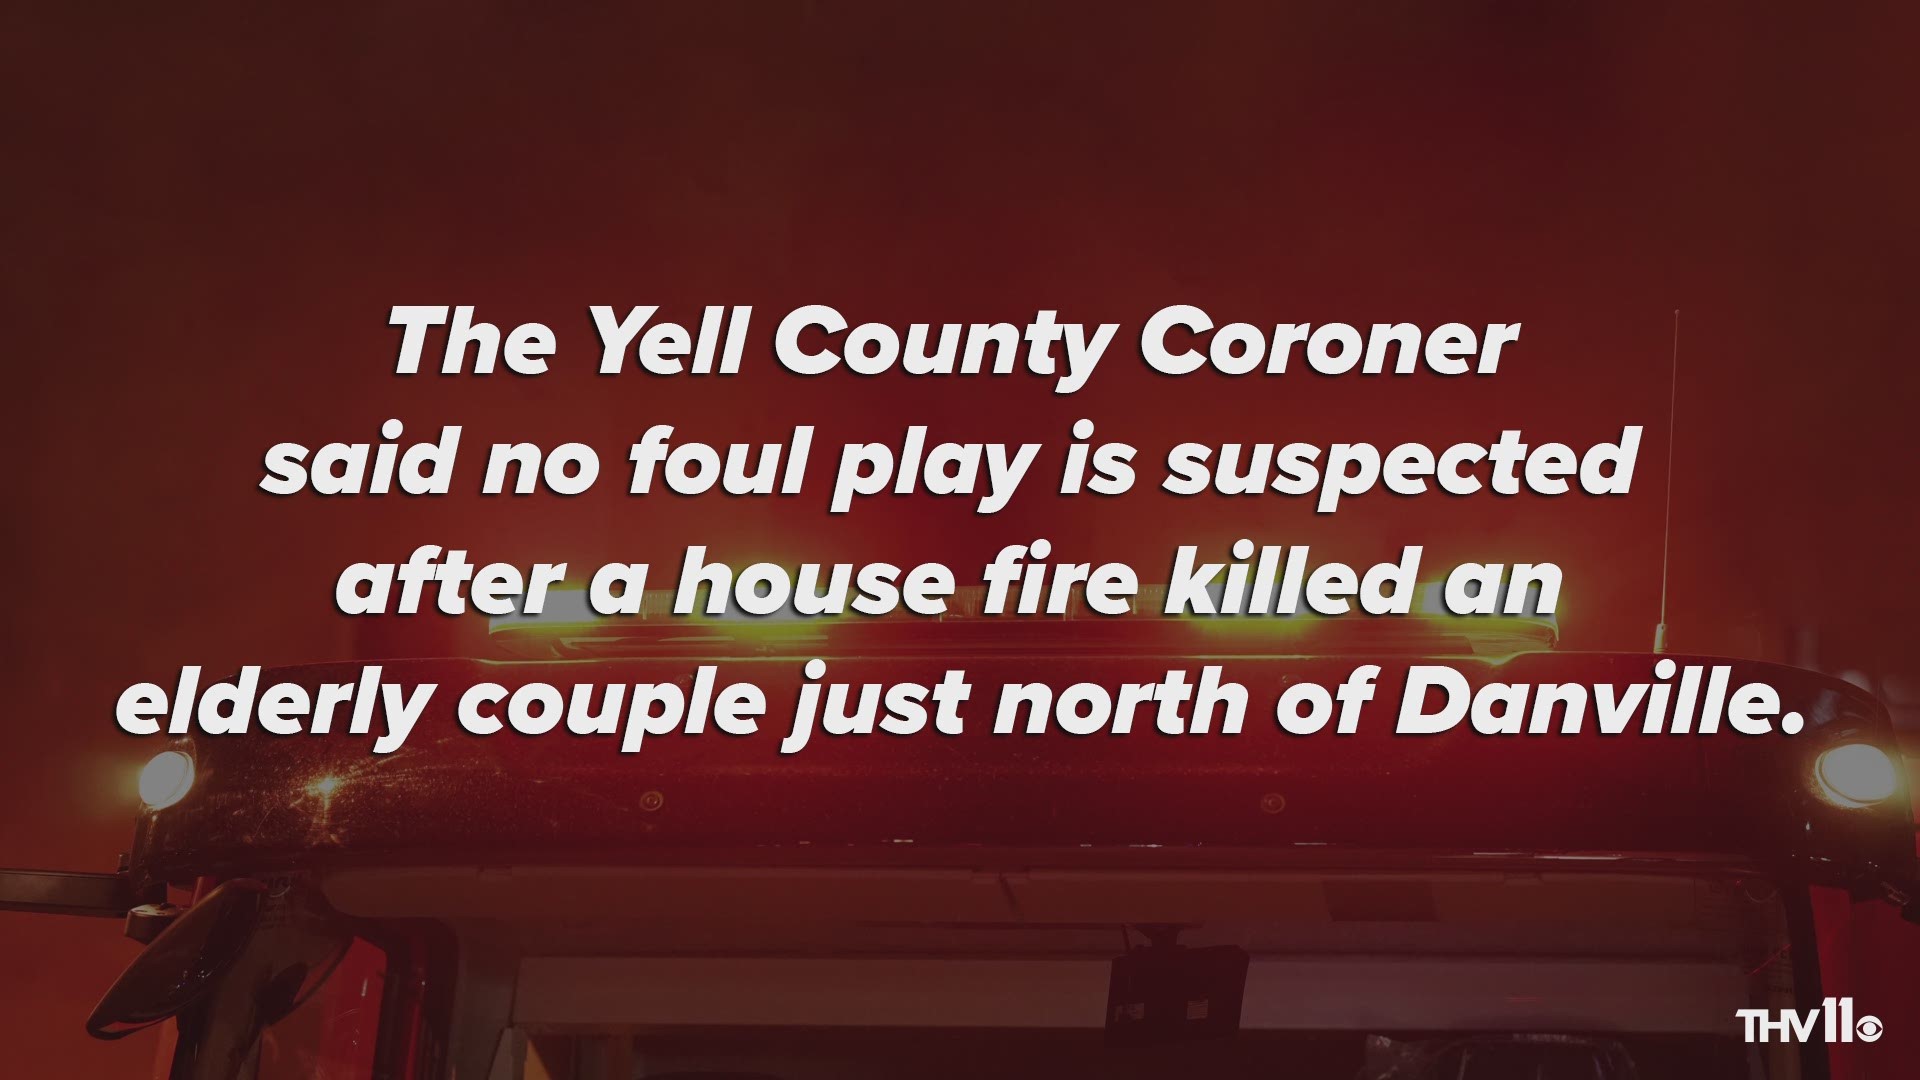 The Yell County Coroner says no foul play is suspected after a house fire killed an elderly couple just north of Danville.